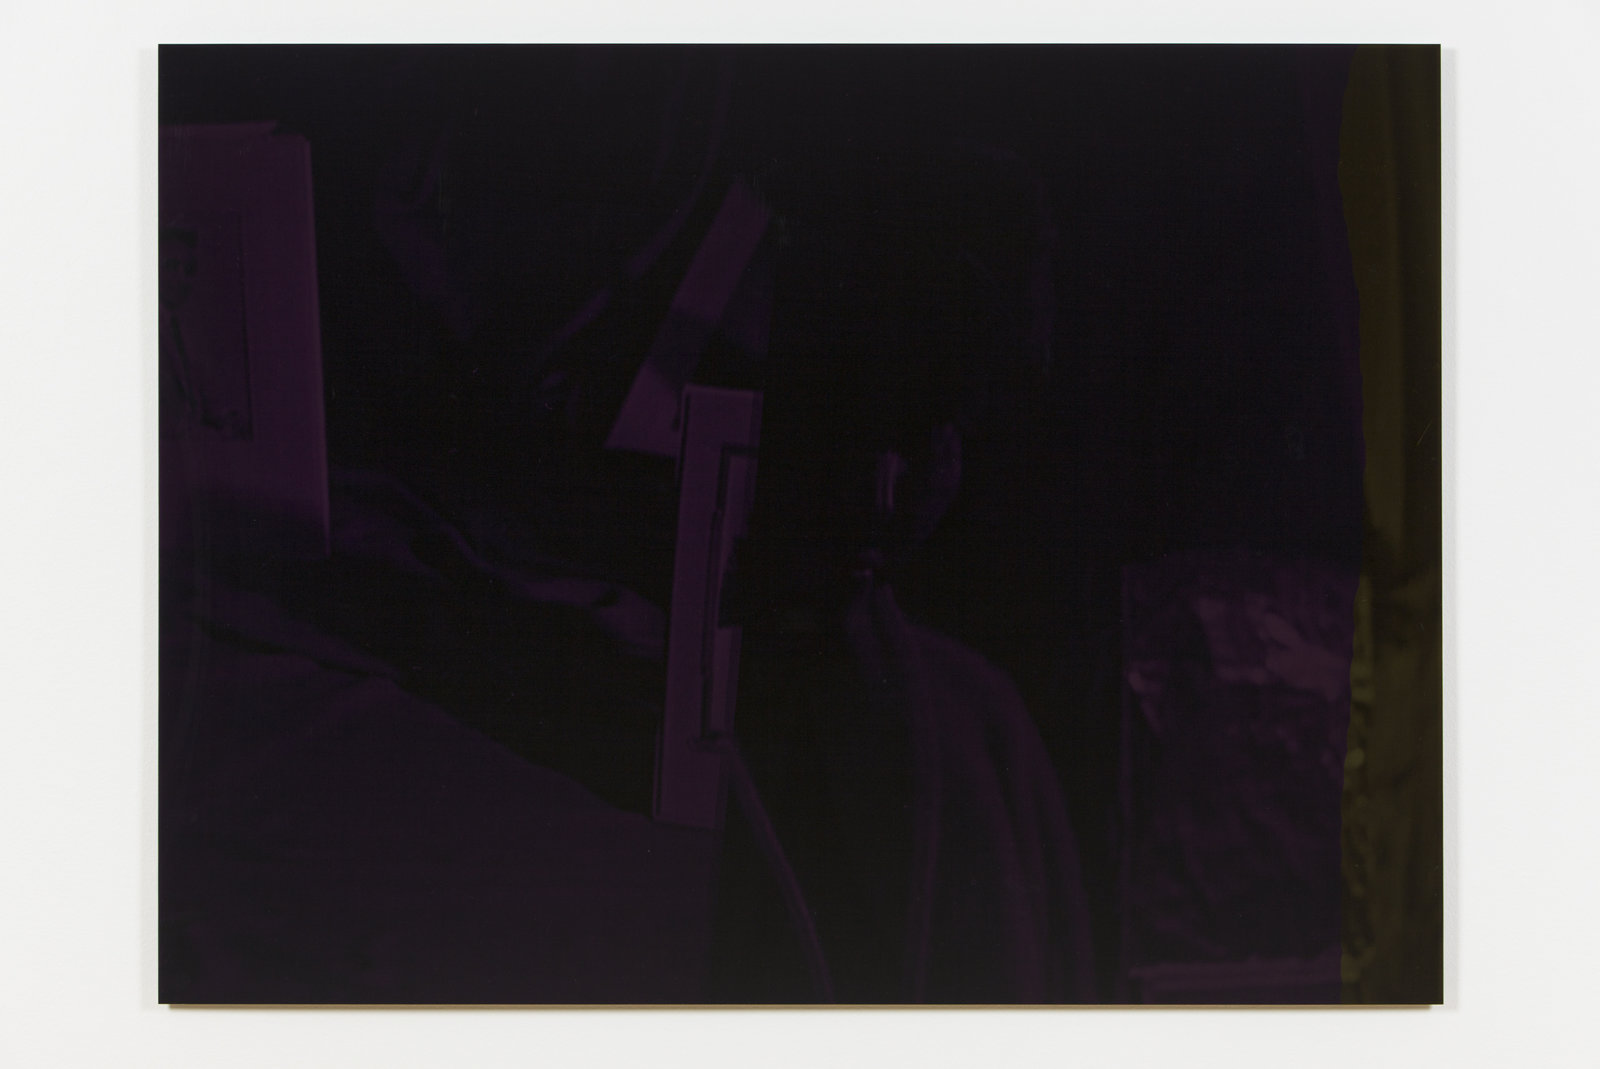 Raymond Boisjoly, but still concerned, 2013, screen resolution lightjet print face mounted to gray-tinted acrylic glass, vinyl text, 36 x 48 in. (92 x 122 cm)